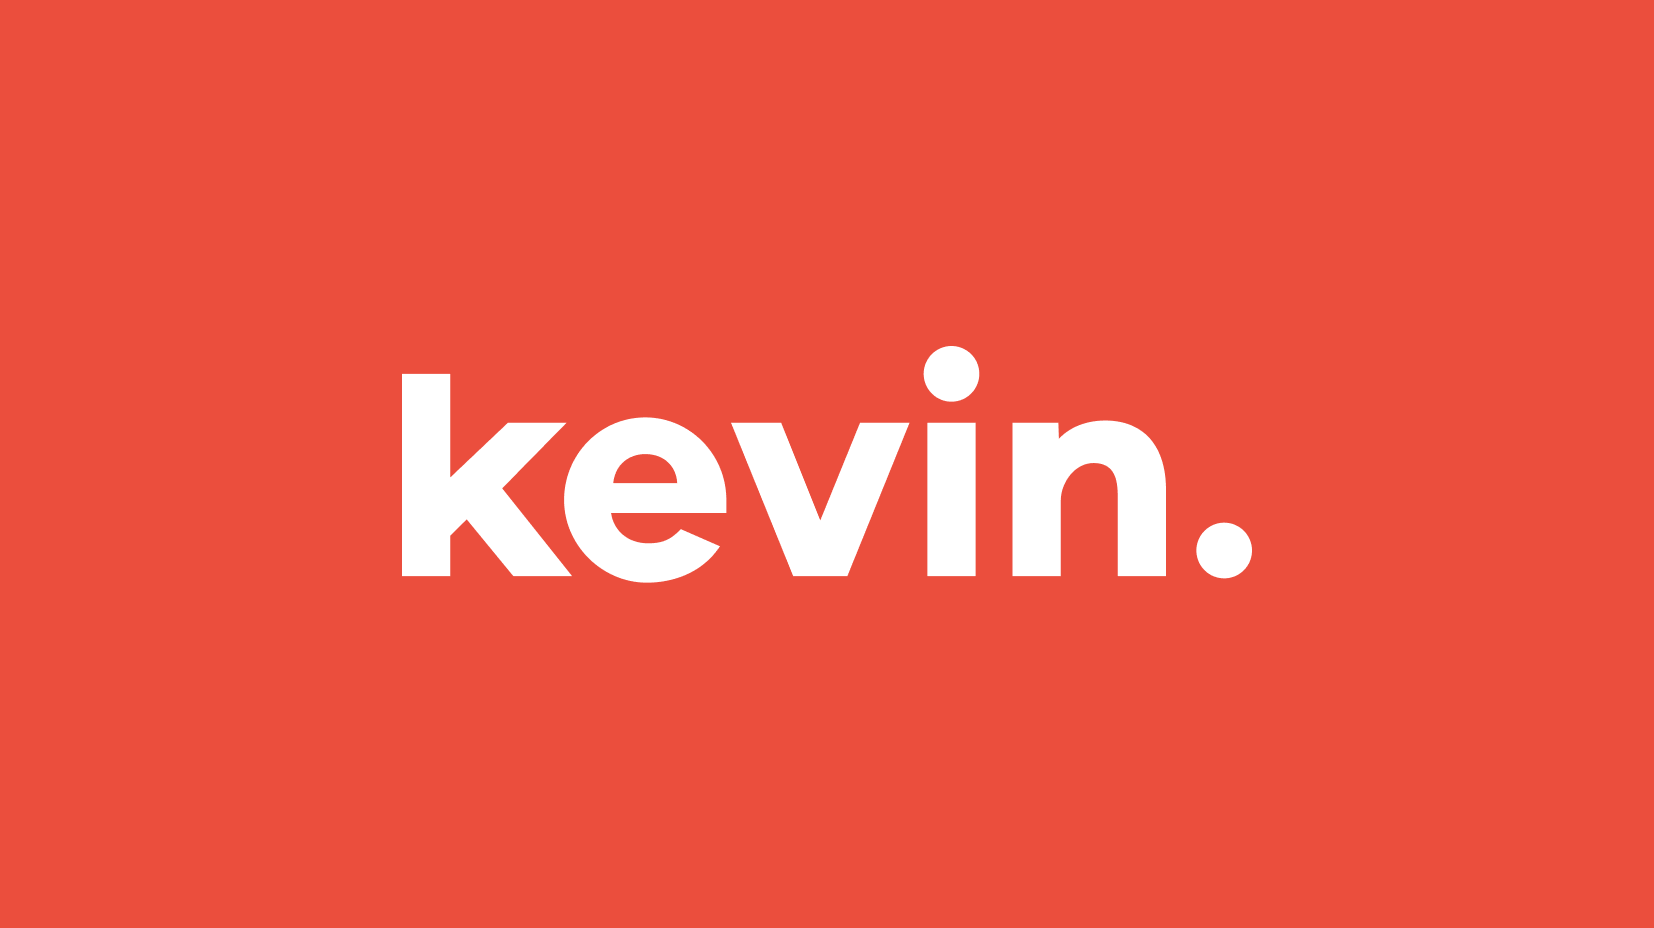 Tech & Product DD | Growth | Code & Co. advises Speedinvest on kevin.